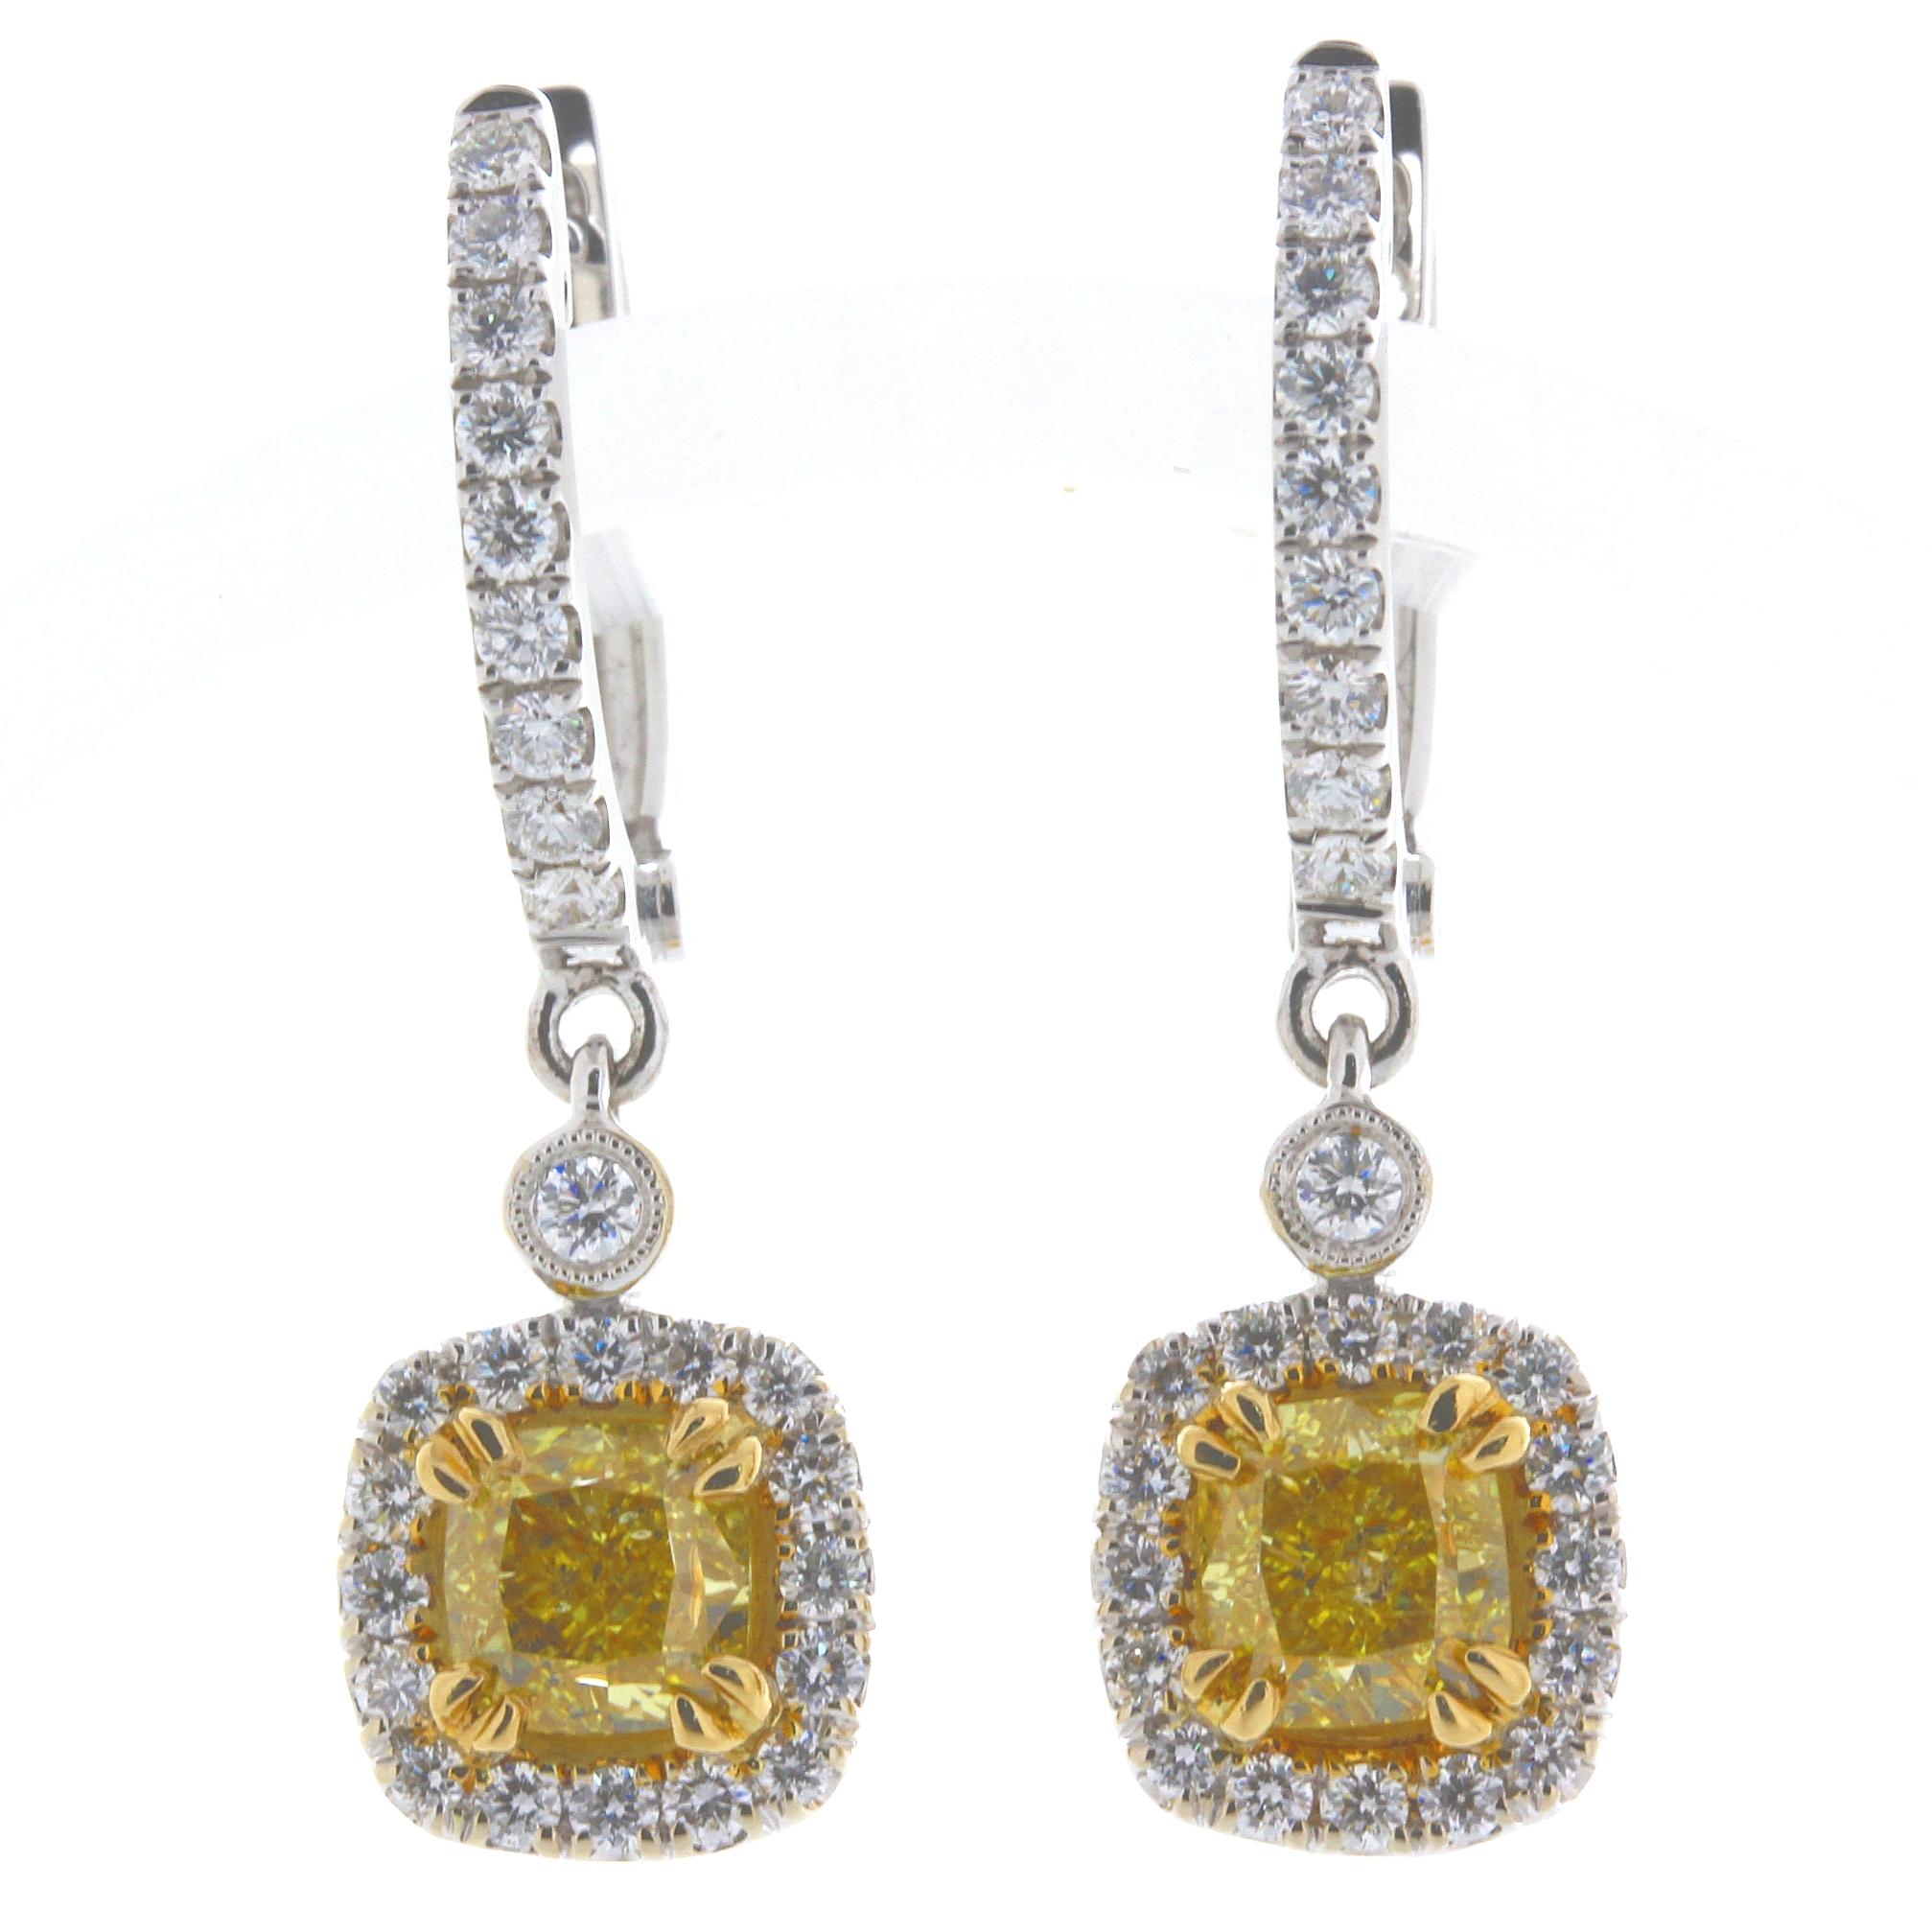 Video available upon request. 
Perfectly matched Pair of 2.01 Carat Total Weight Cushion Cut, Natural Vivid Yellow Color, Even SI2 Clarity, 18 Karat Yellow and White Gold Diamond Earrings.
One Diamond weights 1.00 Carat and the other Diamond weights